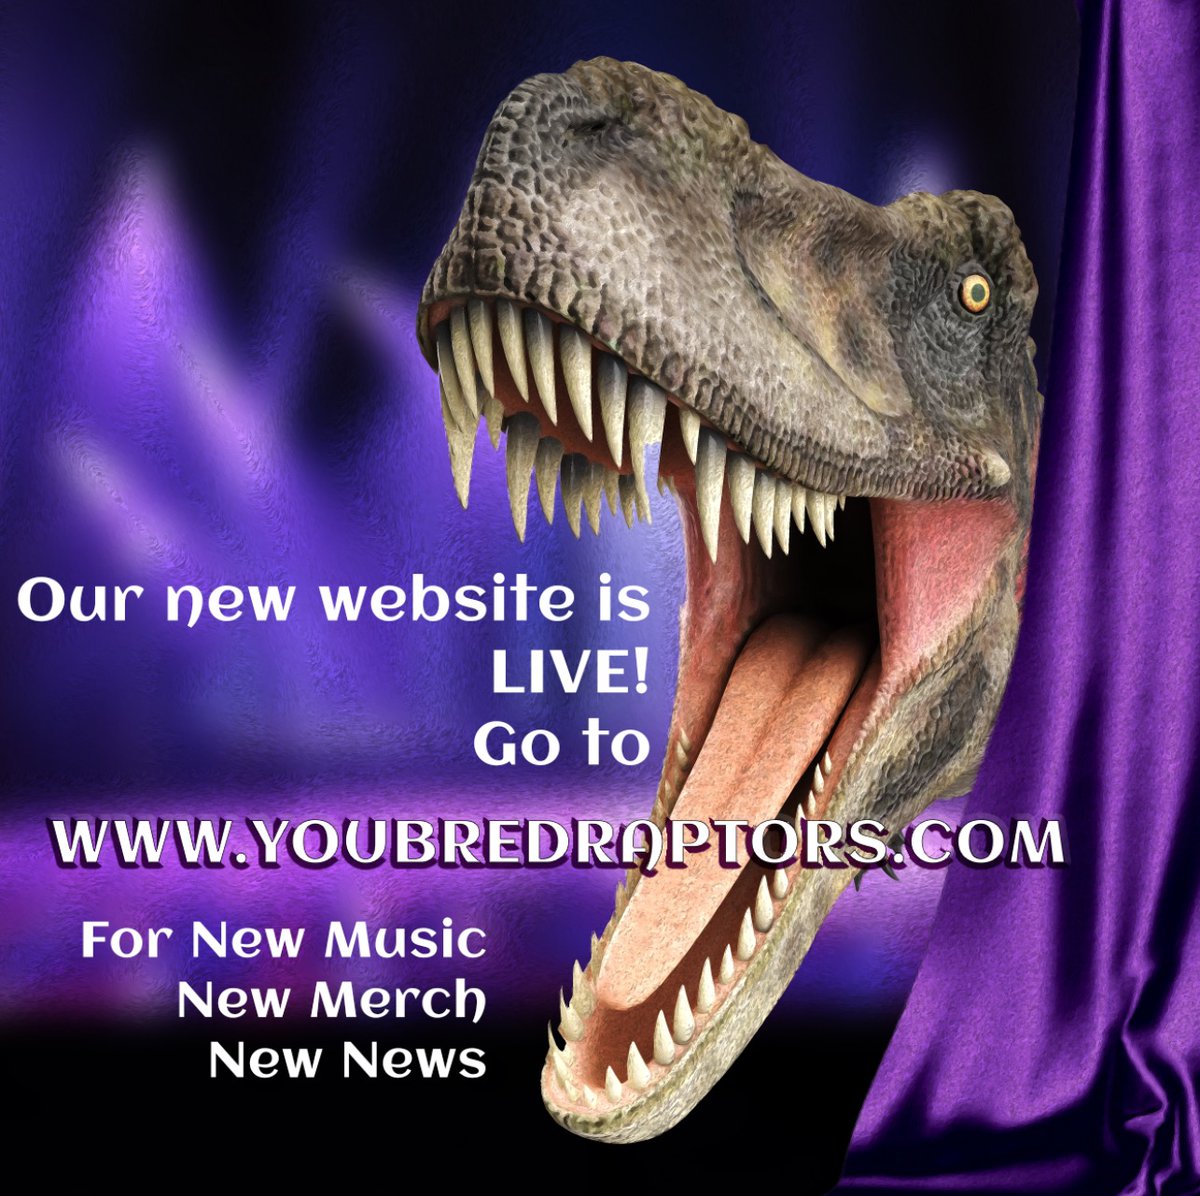 Our new website is LIve! Check out the new sexy merch, blog updates, our thoughts on going MASKLESS, and other bullet points. Stay tuned for next week for our new Patreon page and album pre-order (including VINYL!) Sorry for yelling. Actually, we aren't. Youbredraptors.com